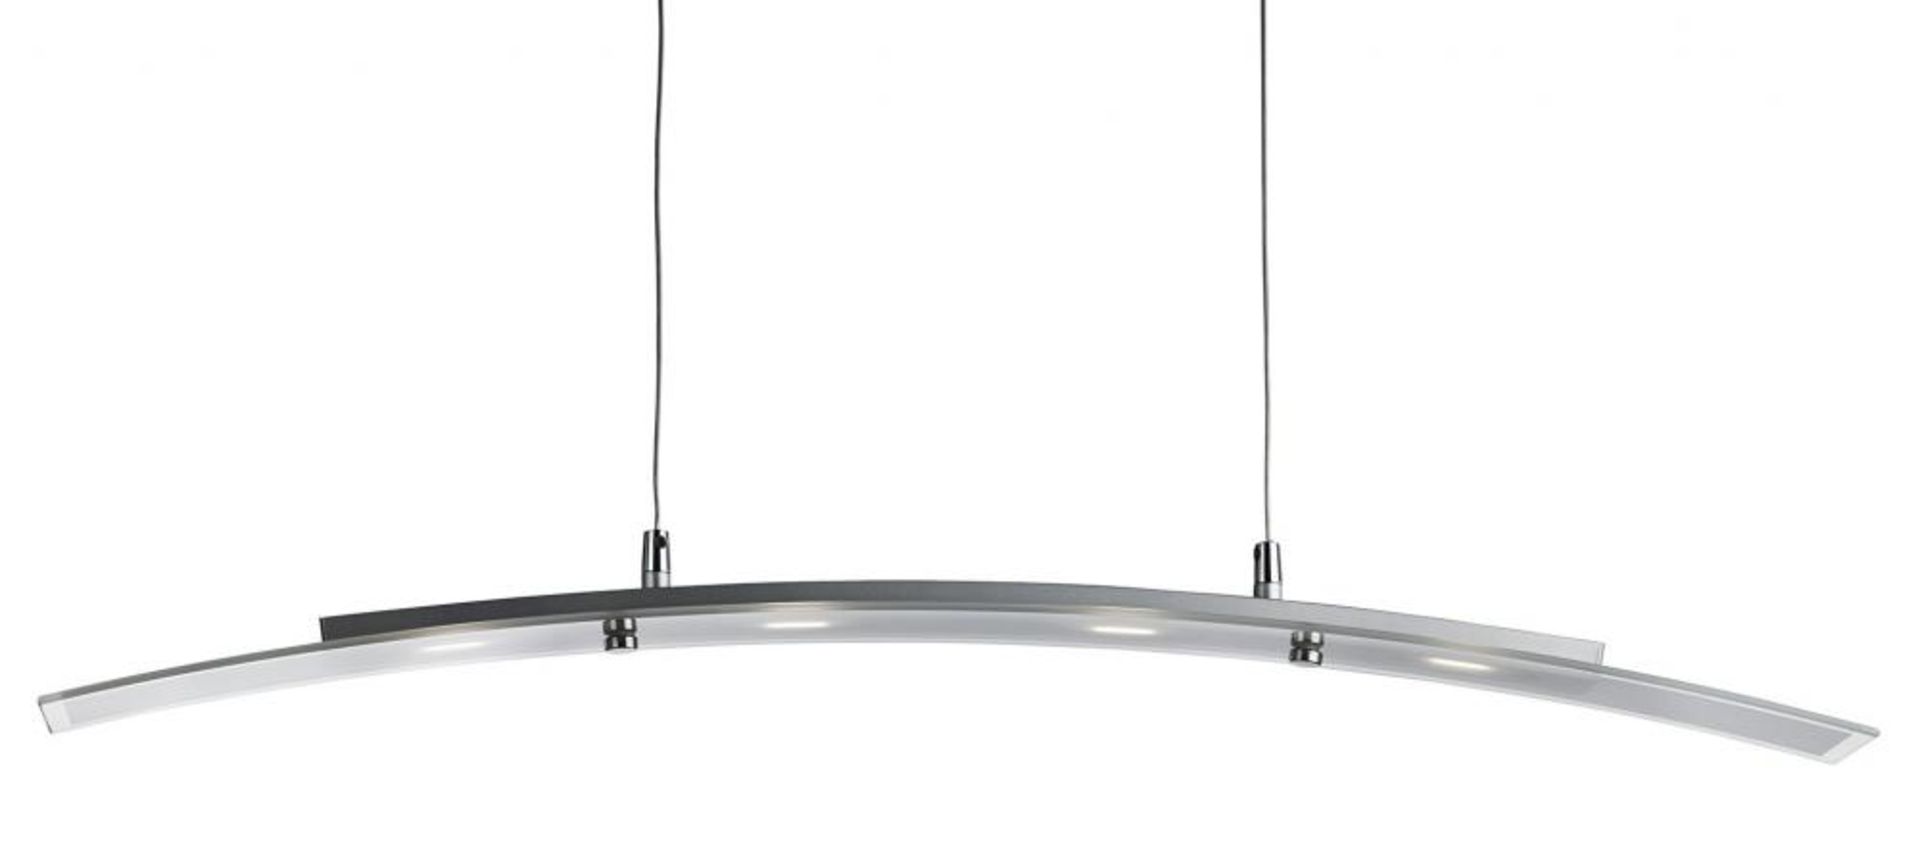 1 x Satin Silver 4 Led Curved Bar Light With Clear & Frosted Glass - Adjustable Height - New Boxed S